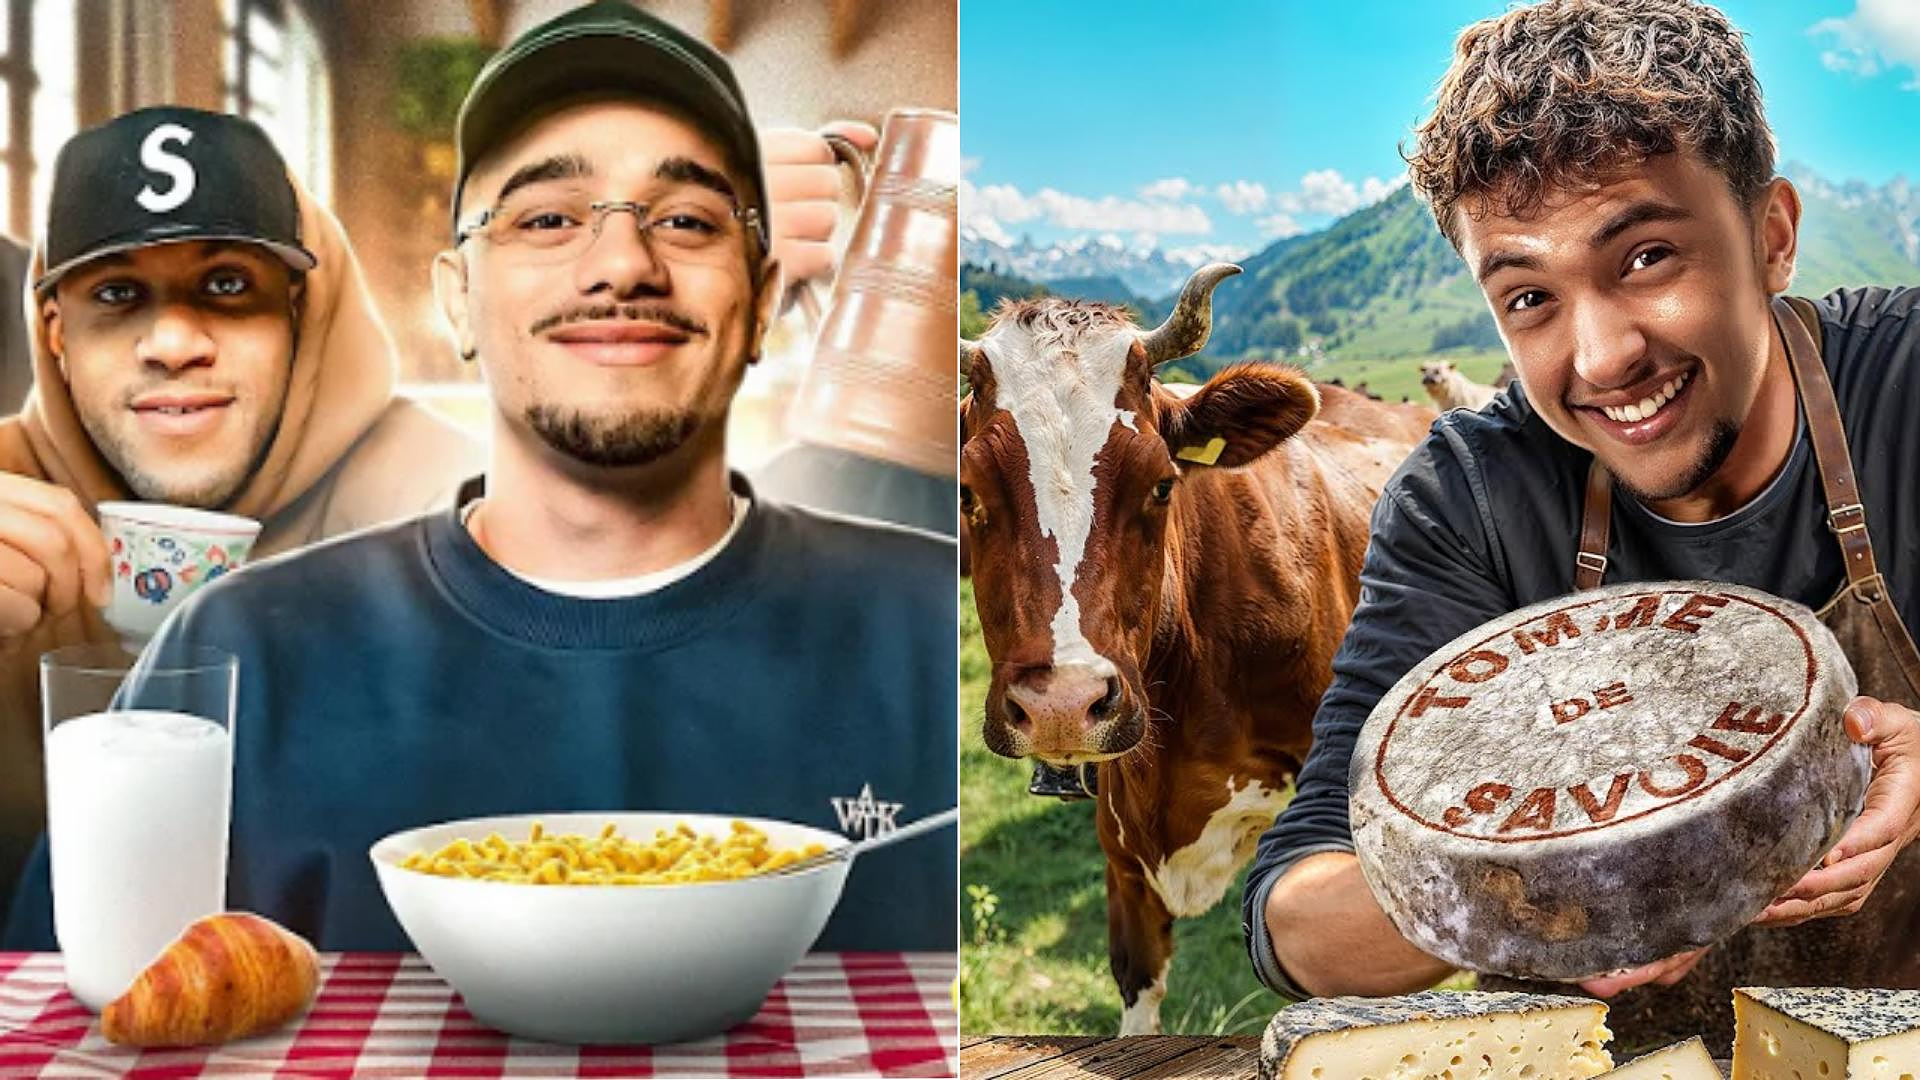 “More than one in two young people have seen our videos”: how Dairy Products and YouTube stars became “friends for life”